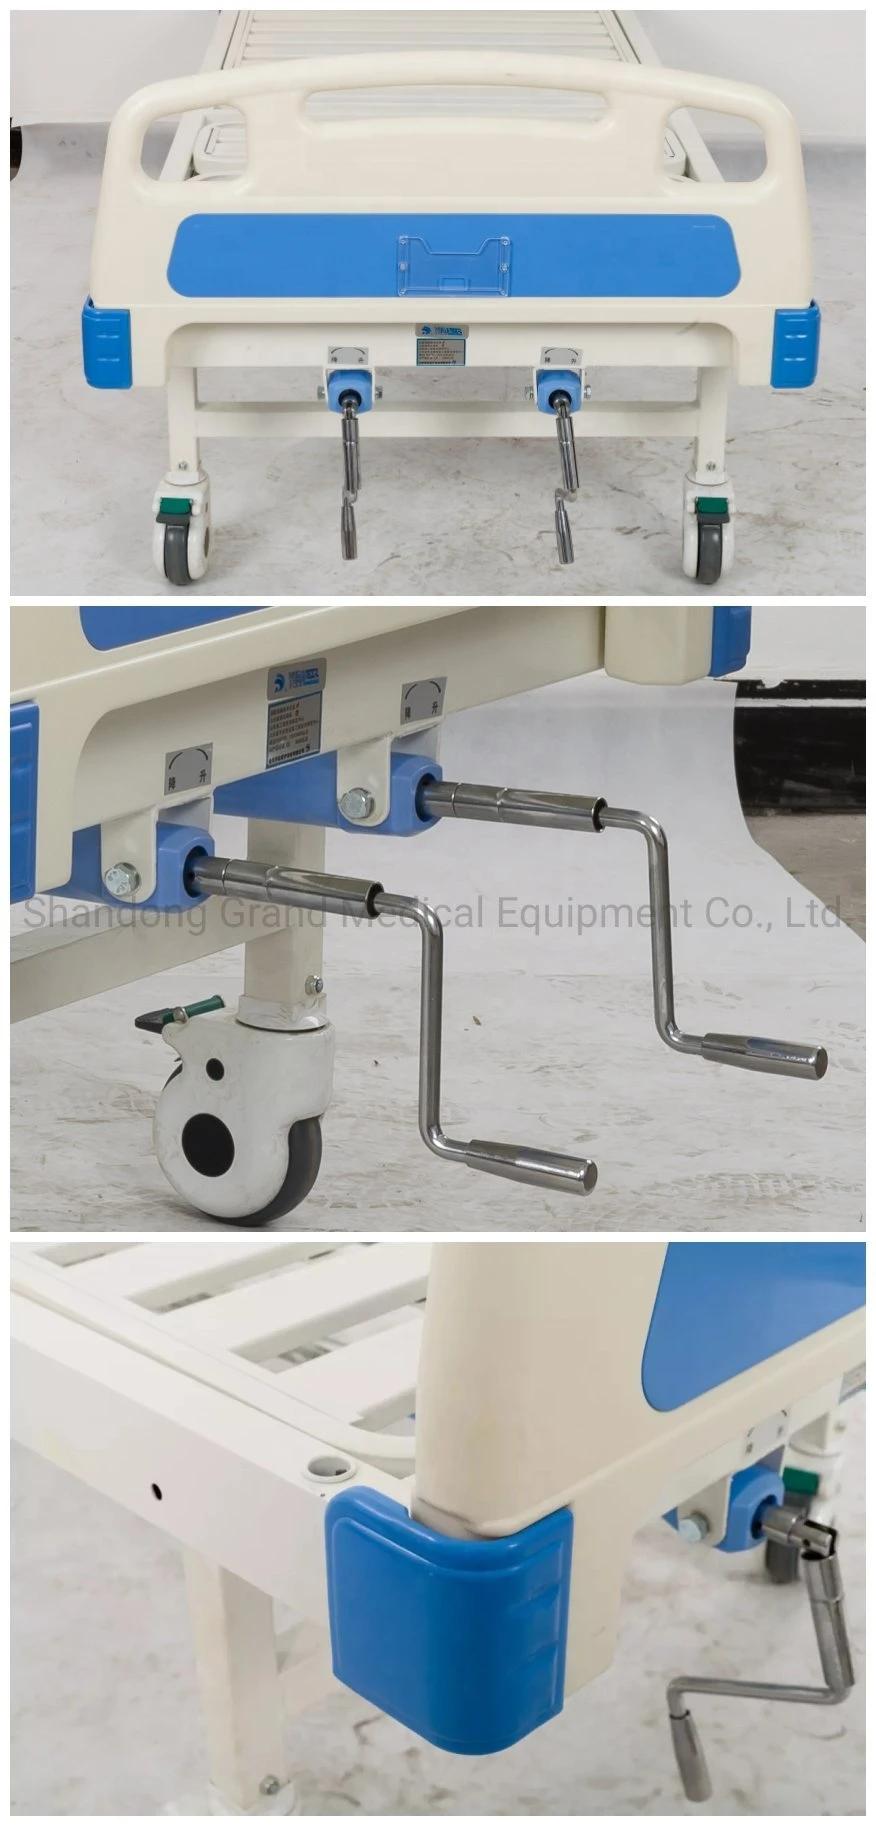 Customized Newly Design Hospital Furniture Medical Equipment Electric and Manual Adjustable Hospital and Medical Patient Nursing Bed